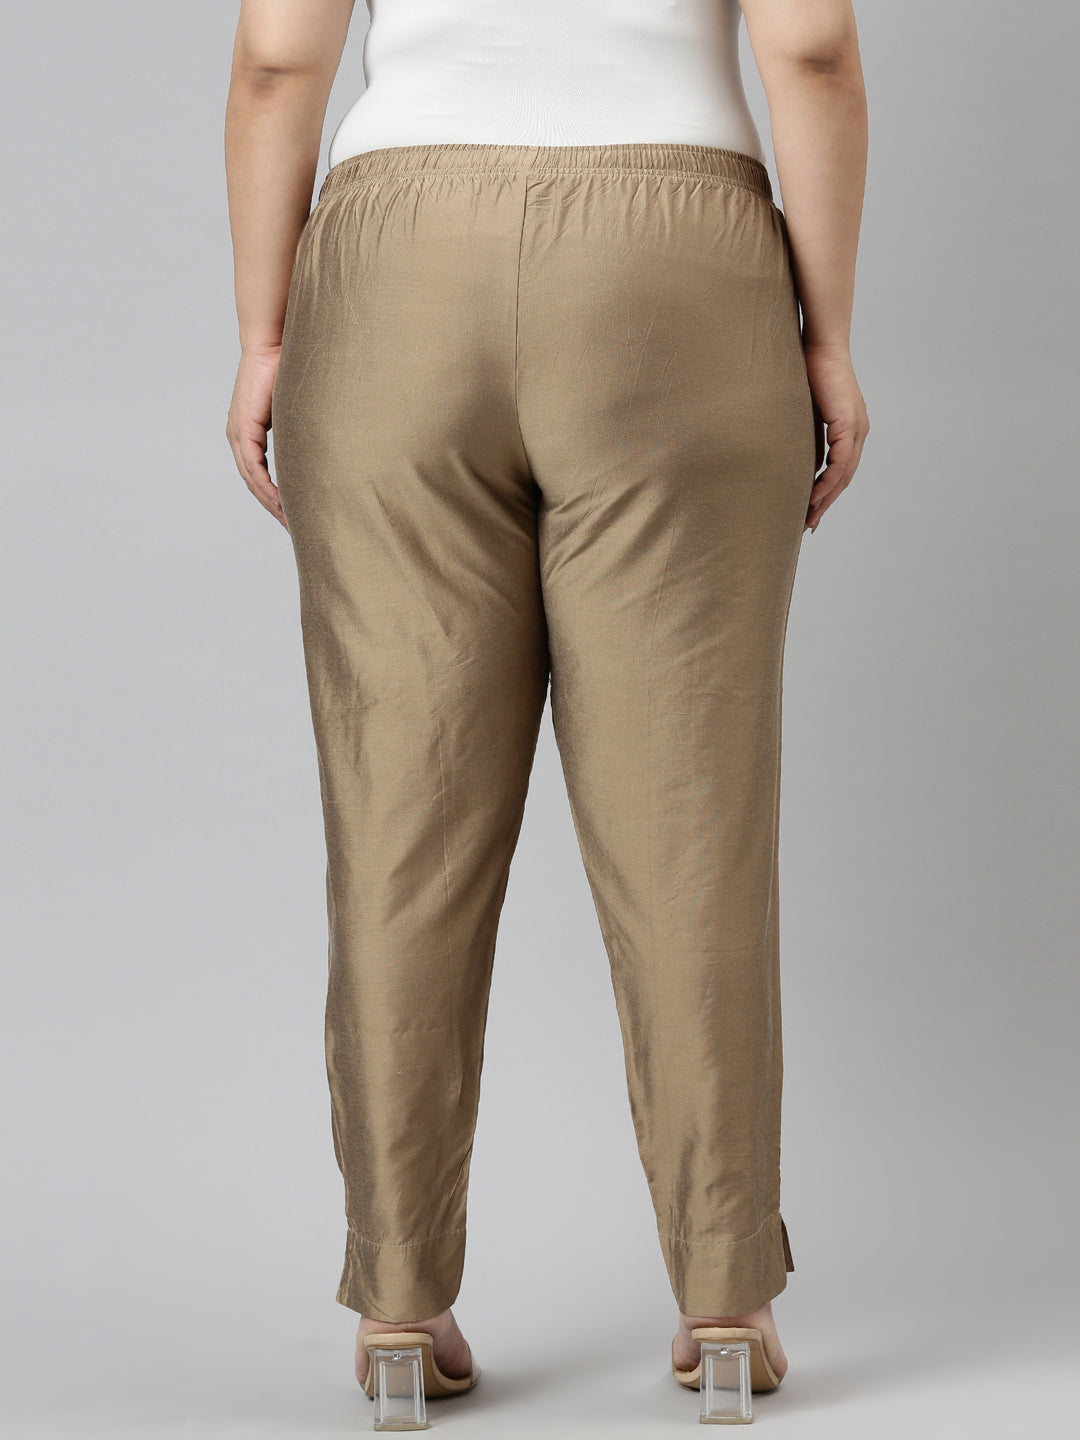 Buy Gold Cotton Solid Cigarette Pants Online in India  Juniper Fashion